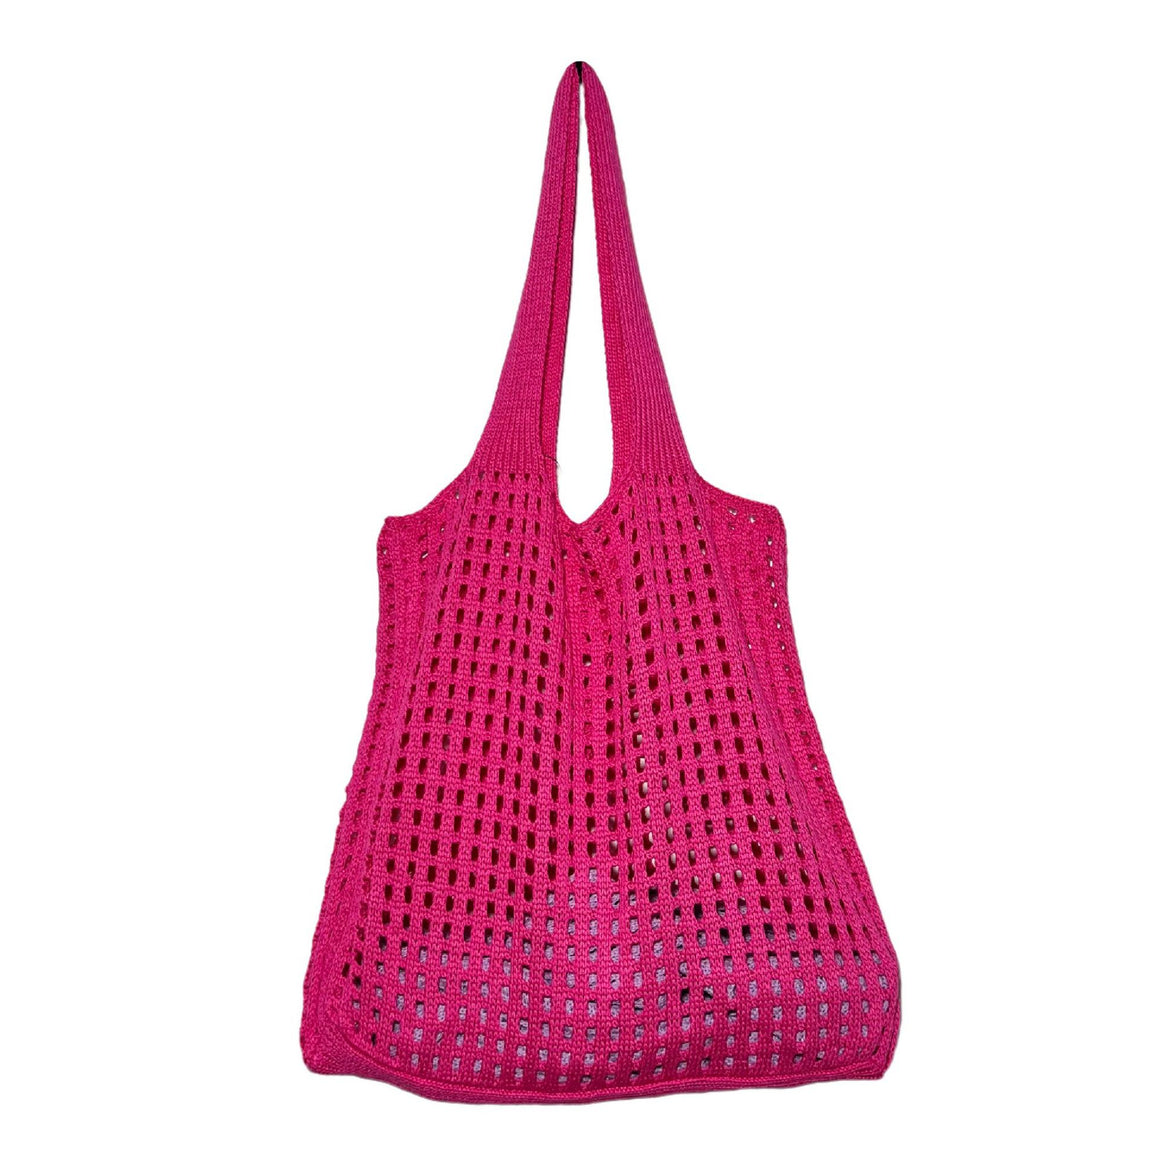 Stay Stylish and Organized with our Knitted Over the Shoulder Beach and Tote Bag